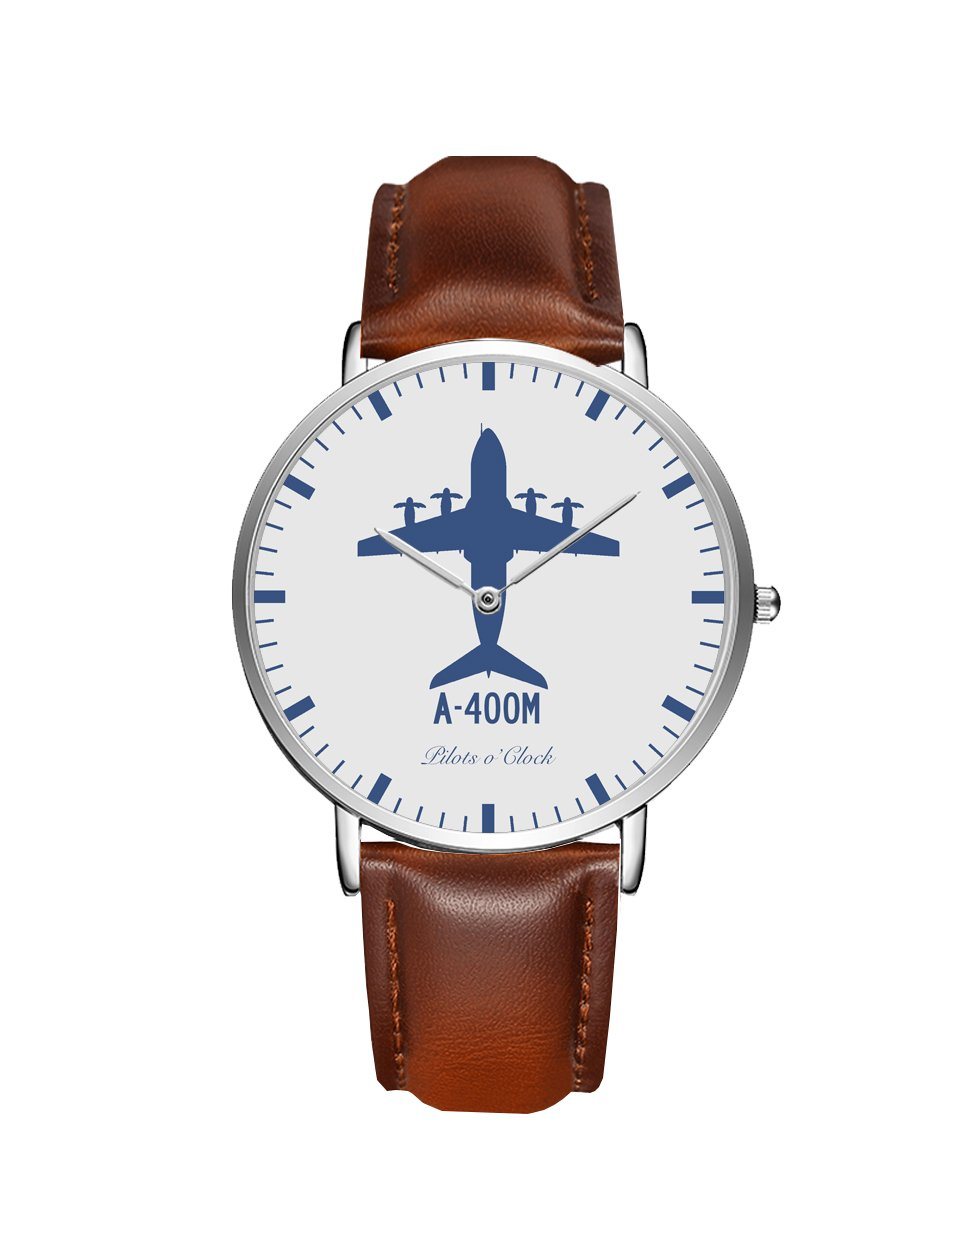 Airbus A400M Leather Strap Watches Pilot Eyes Store Silver & Brown Leather Strap 